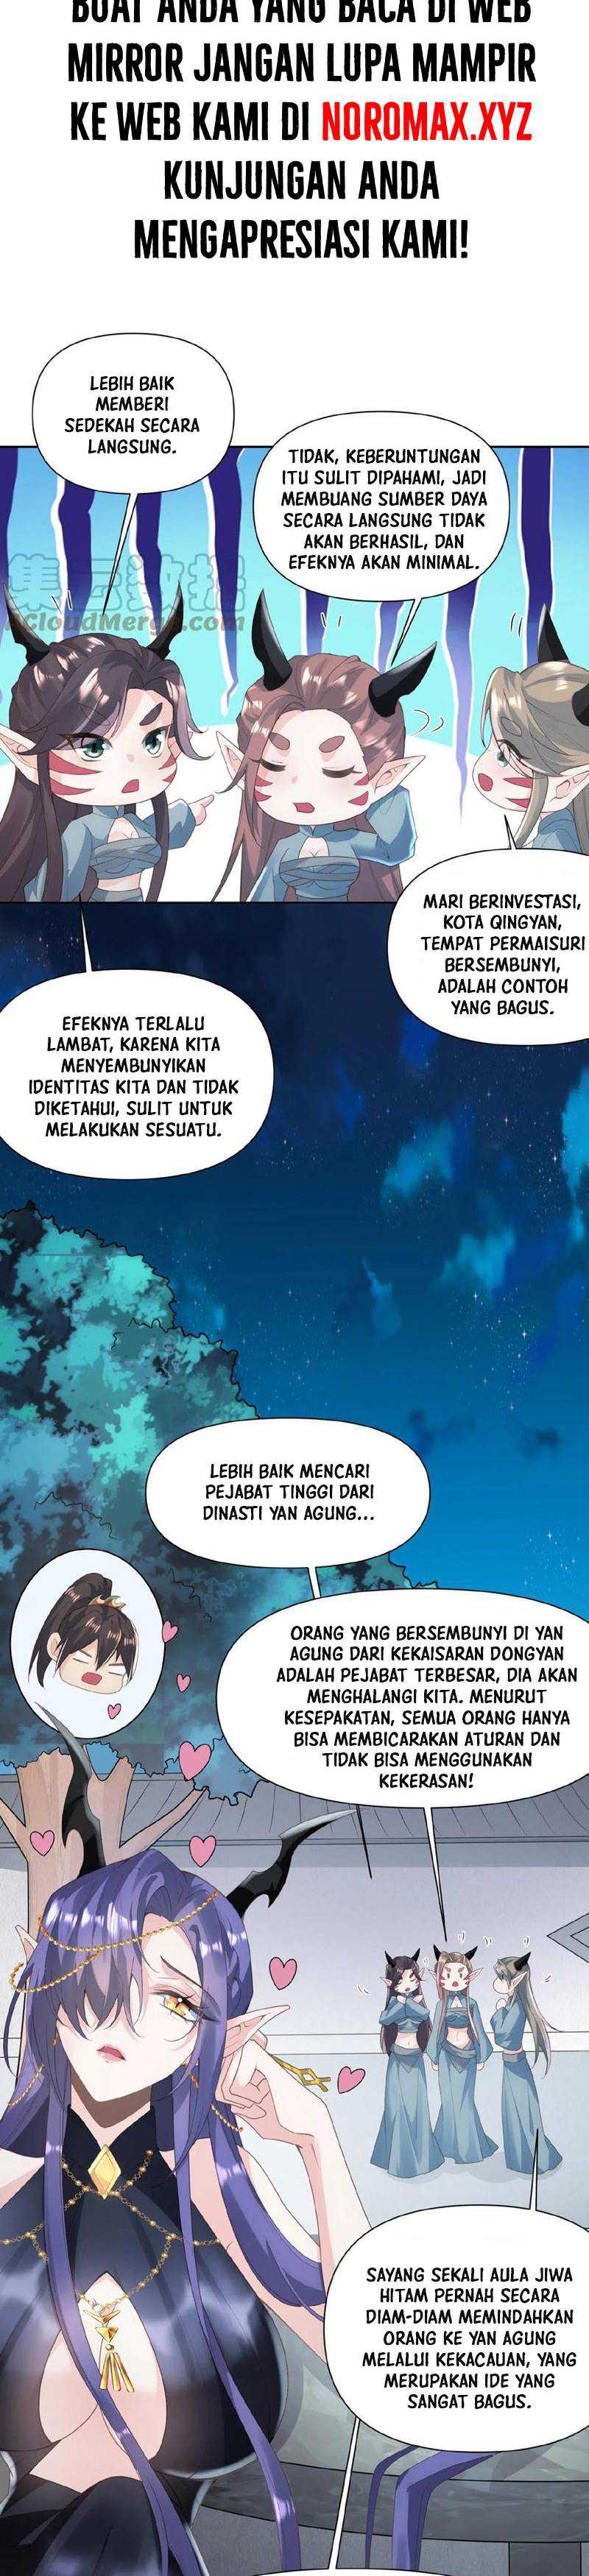 It’s Over! The Queen’s Soft Rice Husband is Actually Invincible Chapter 68 Bahasa Indonesia